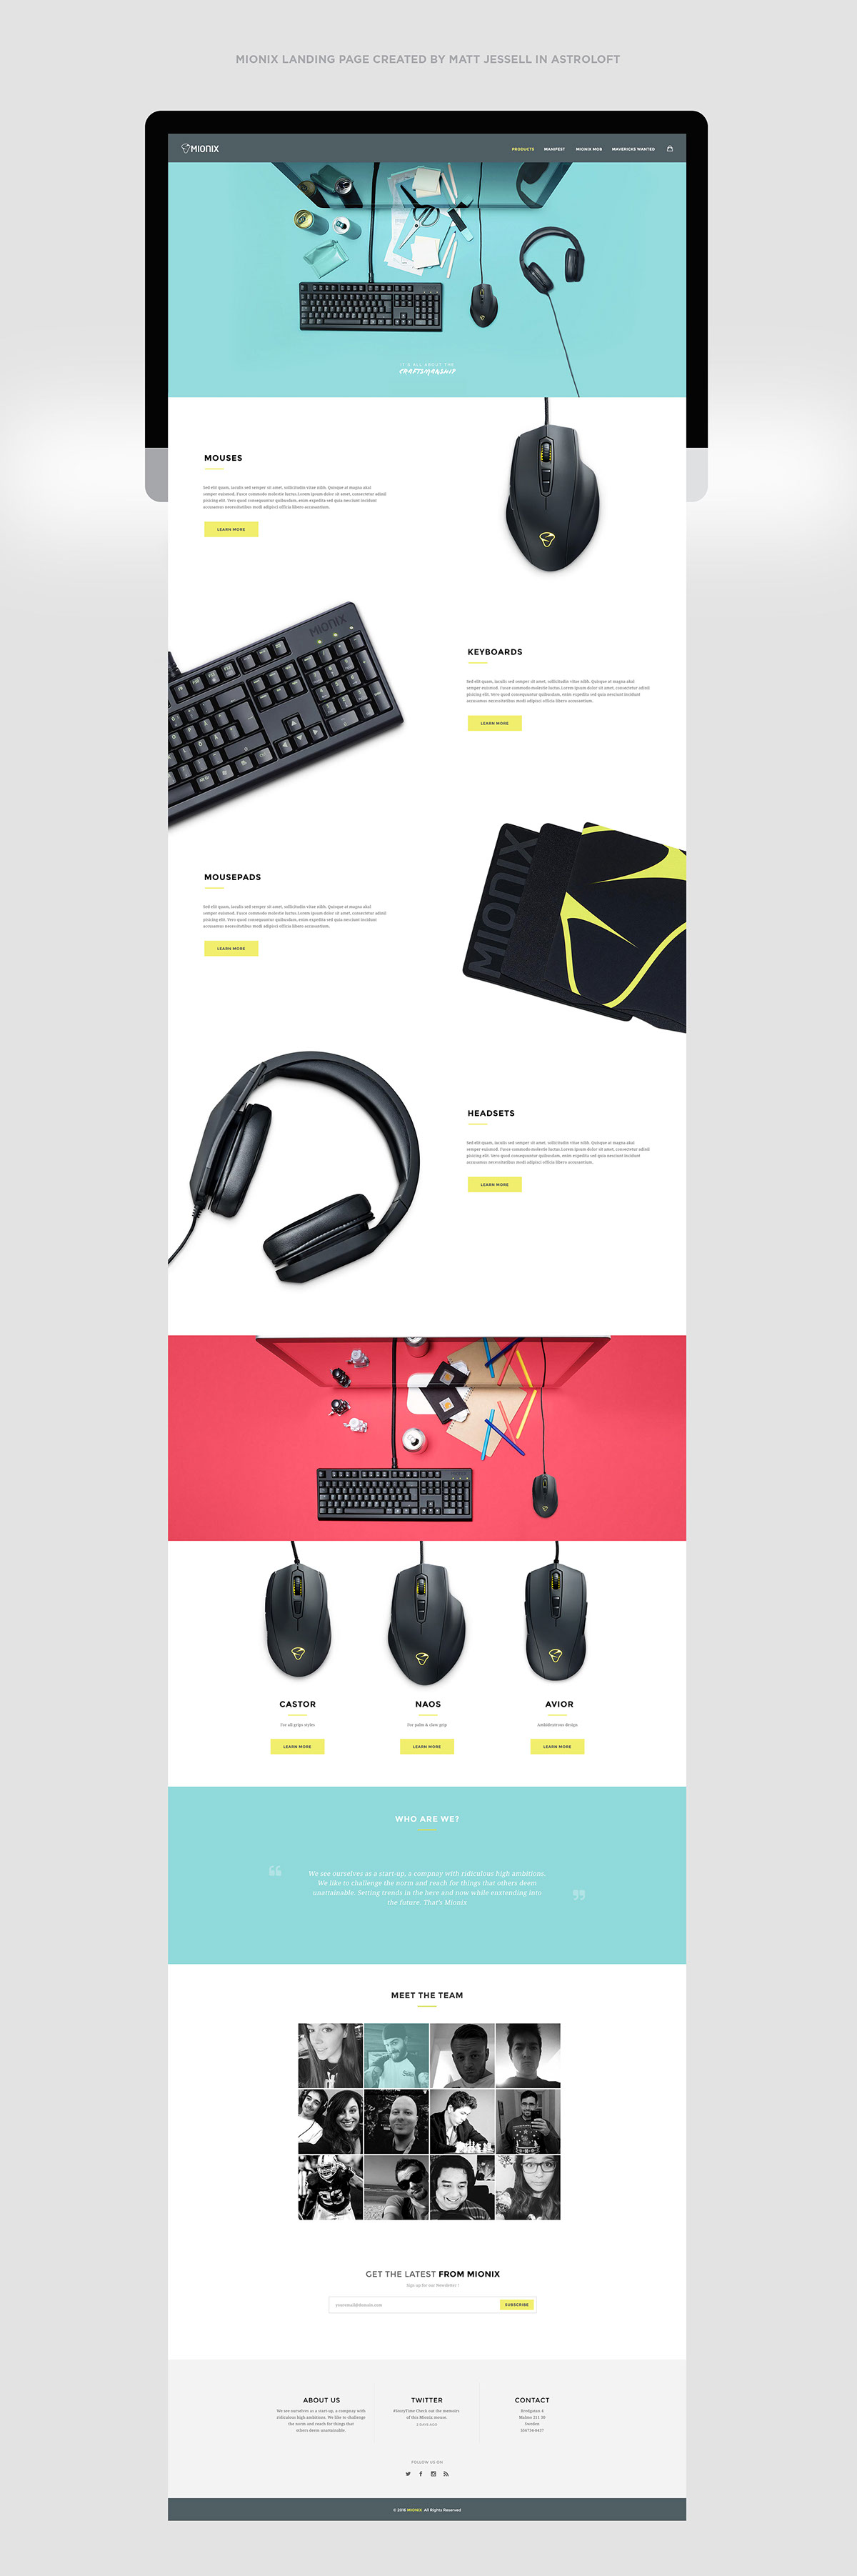 Mionionx Web UI ux design graphics mouses keyboards yellow blue mousepad headsets